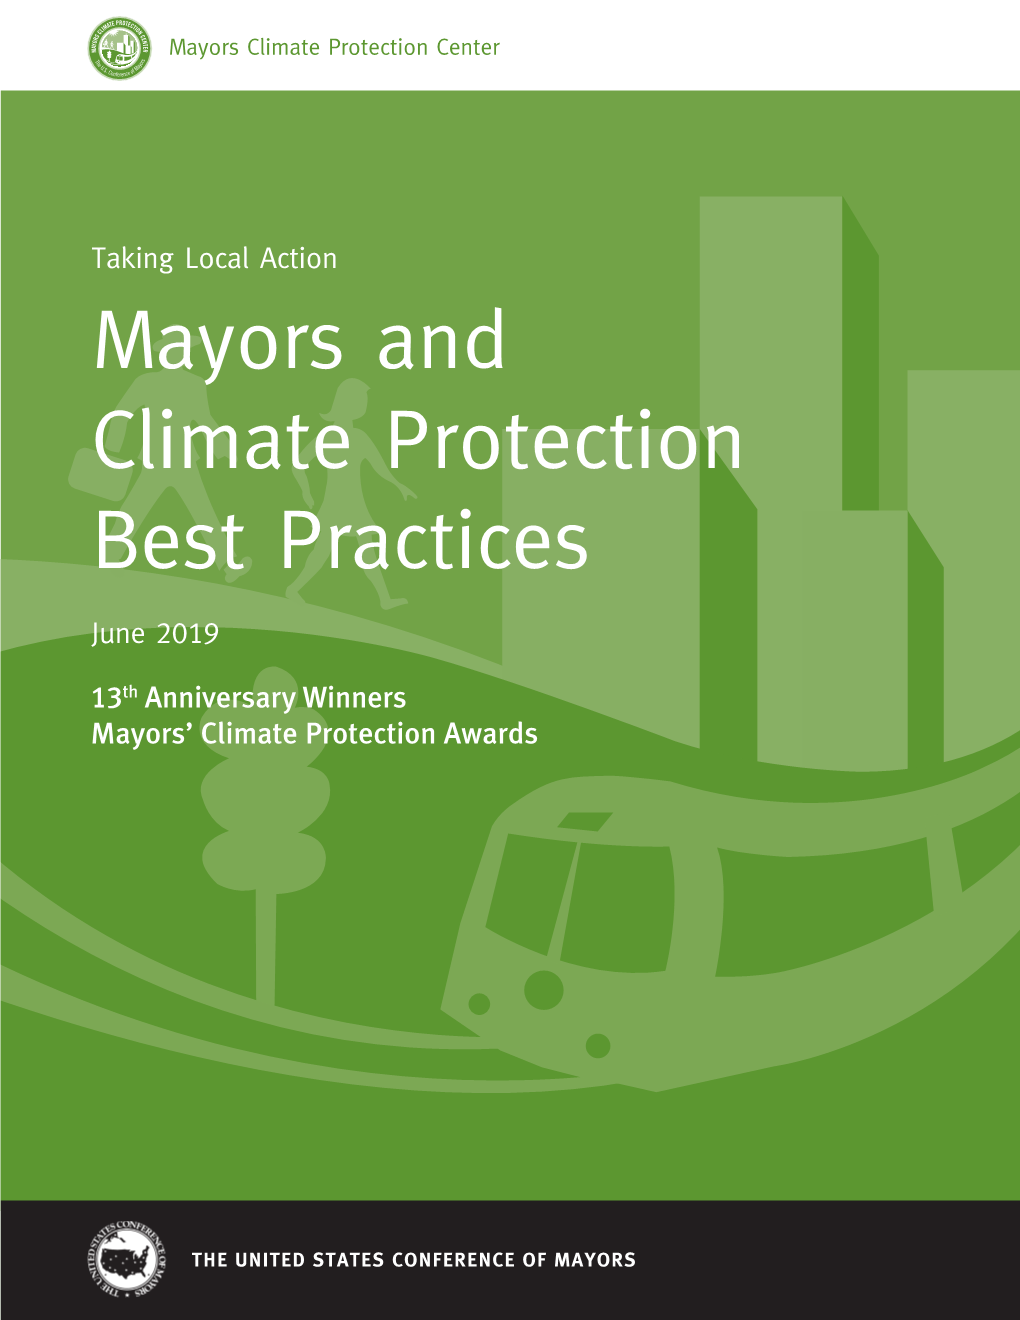 Mayors and Climate Protection Best Practices